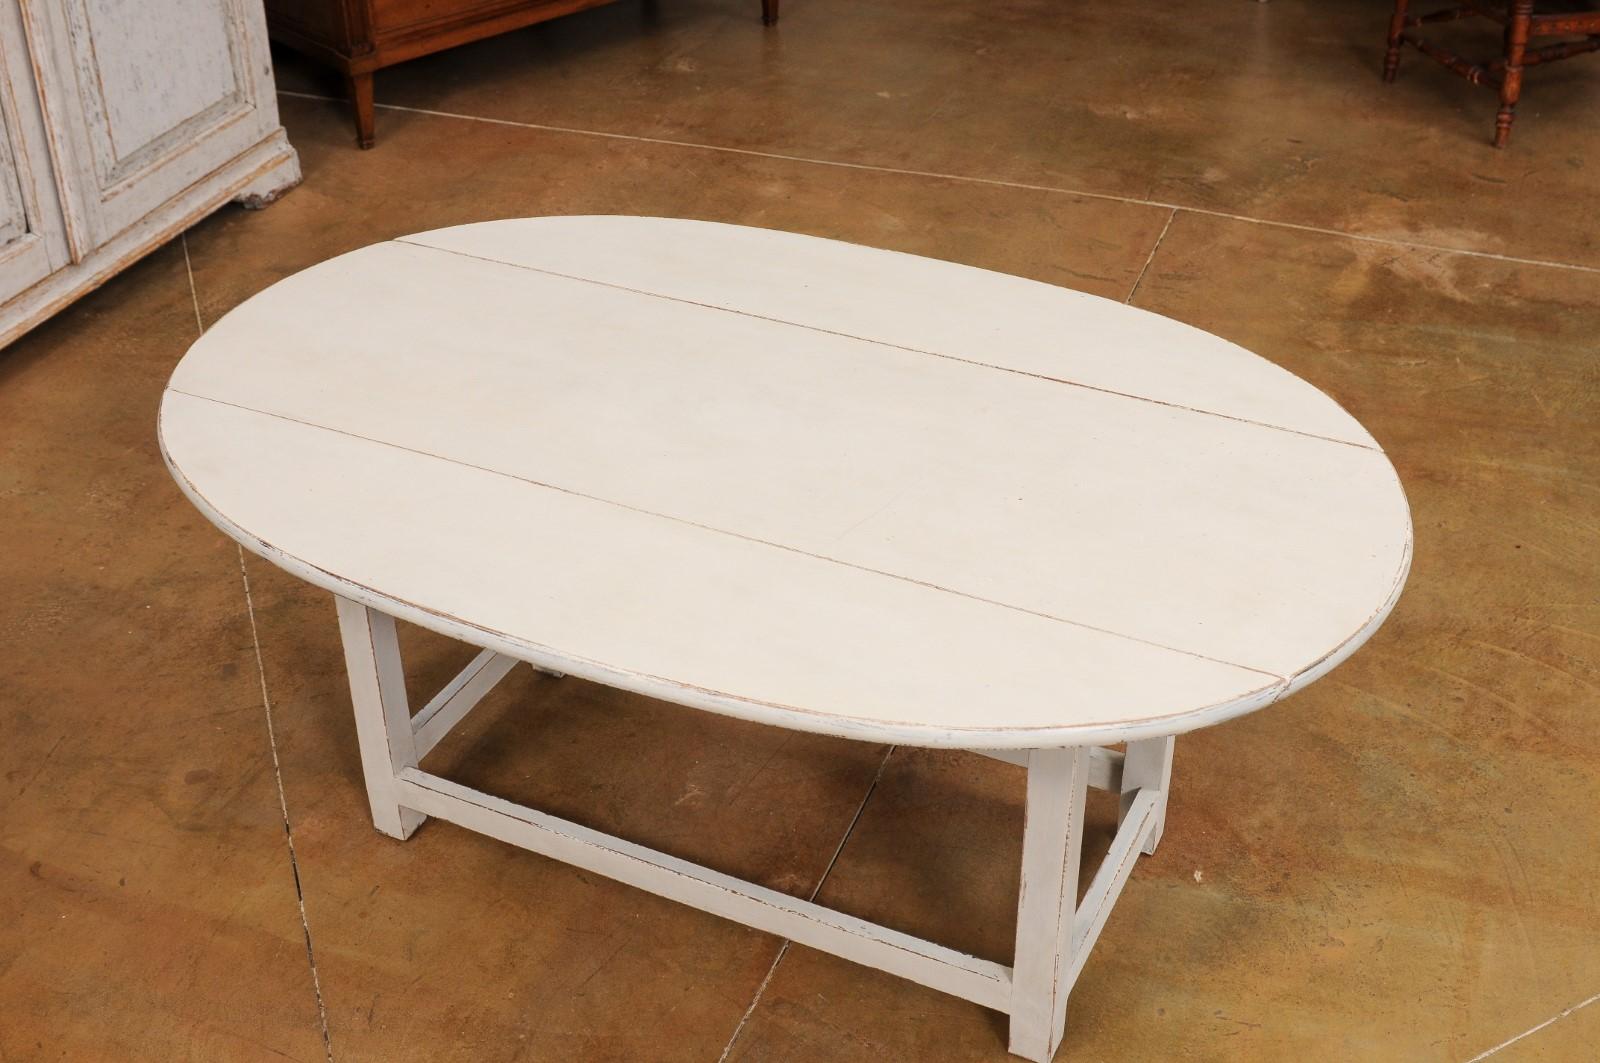 Wood Swedish Grey Painted Oval Top Drop Leaf Coffee Table from the 20th Century For Sale